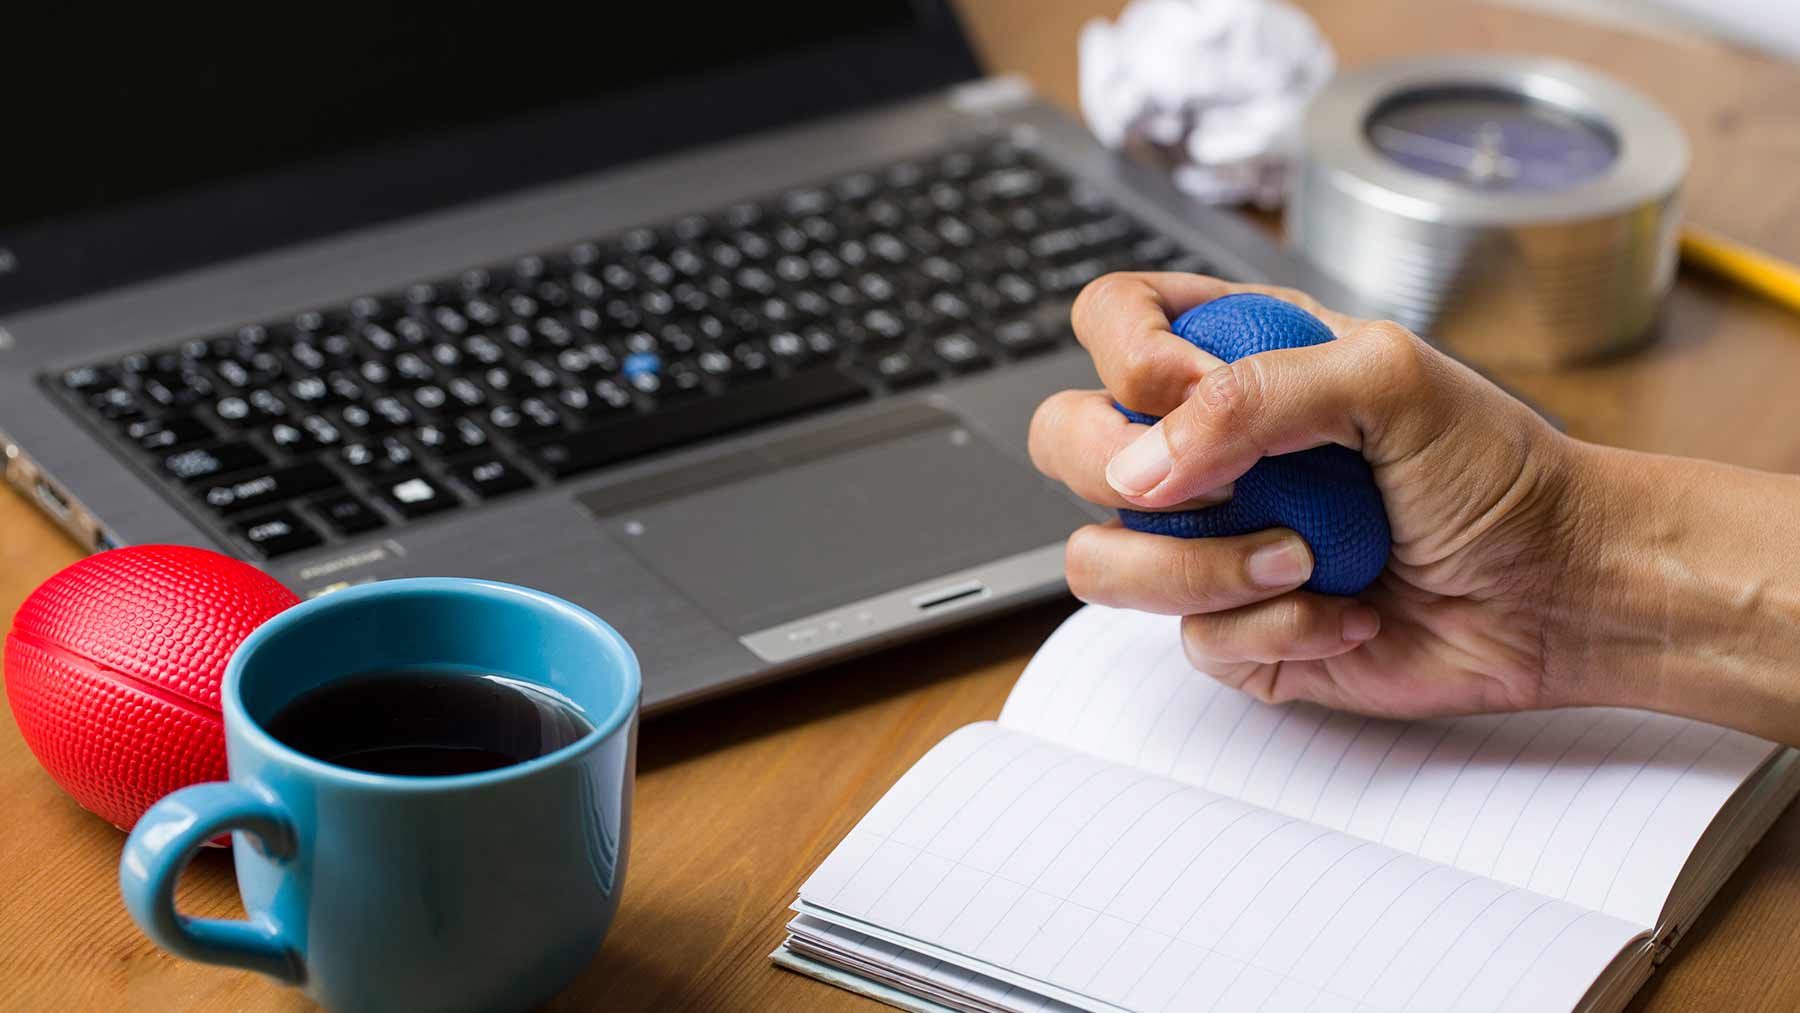 a hand squeezing a stress ball near a cup of coffee and laptop computer